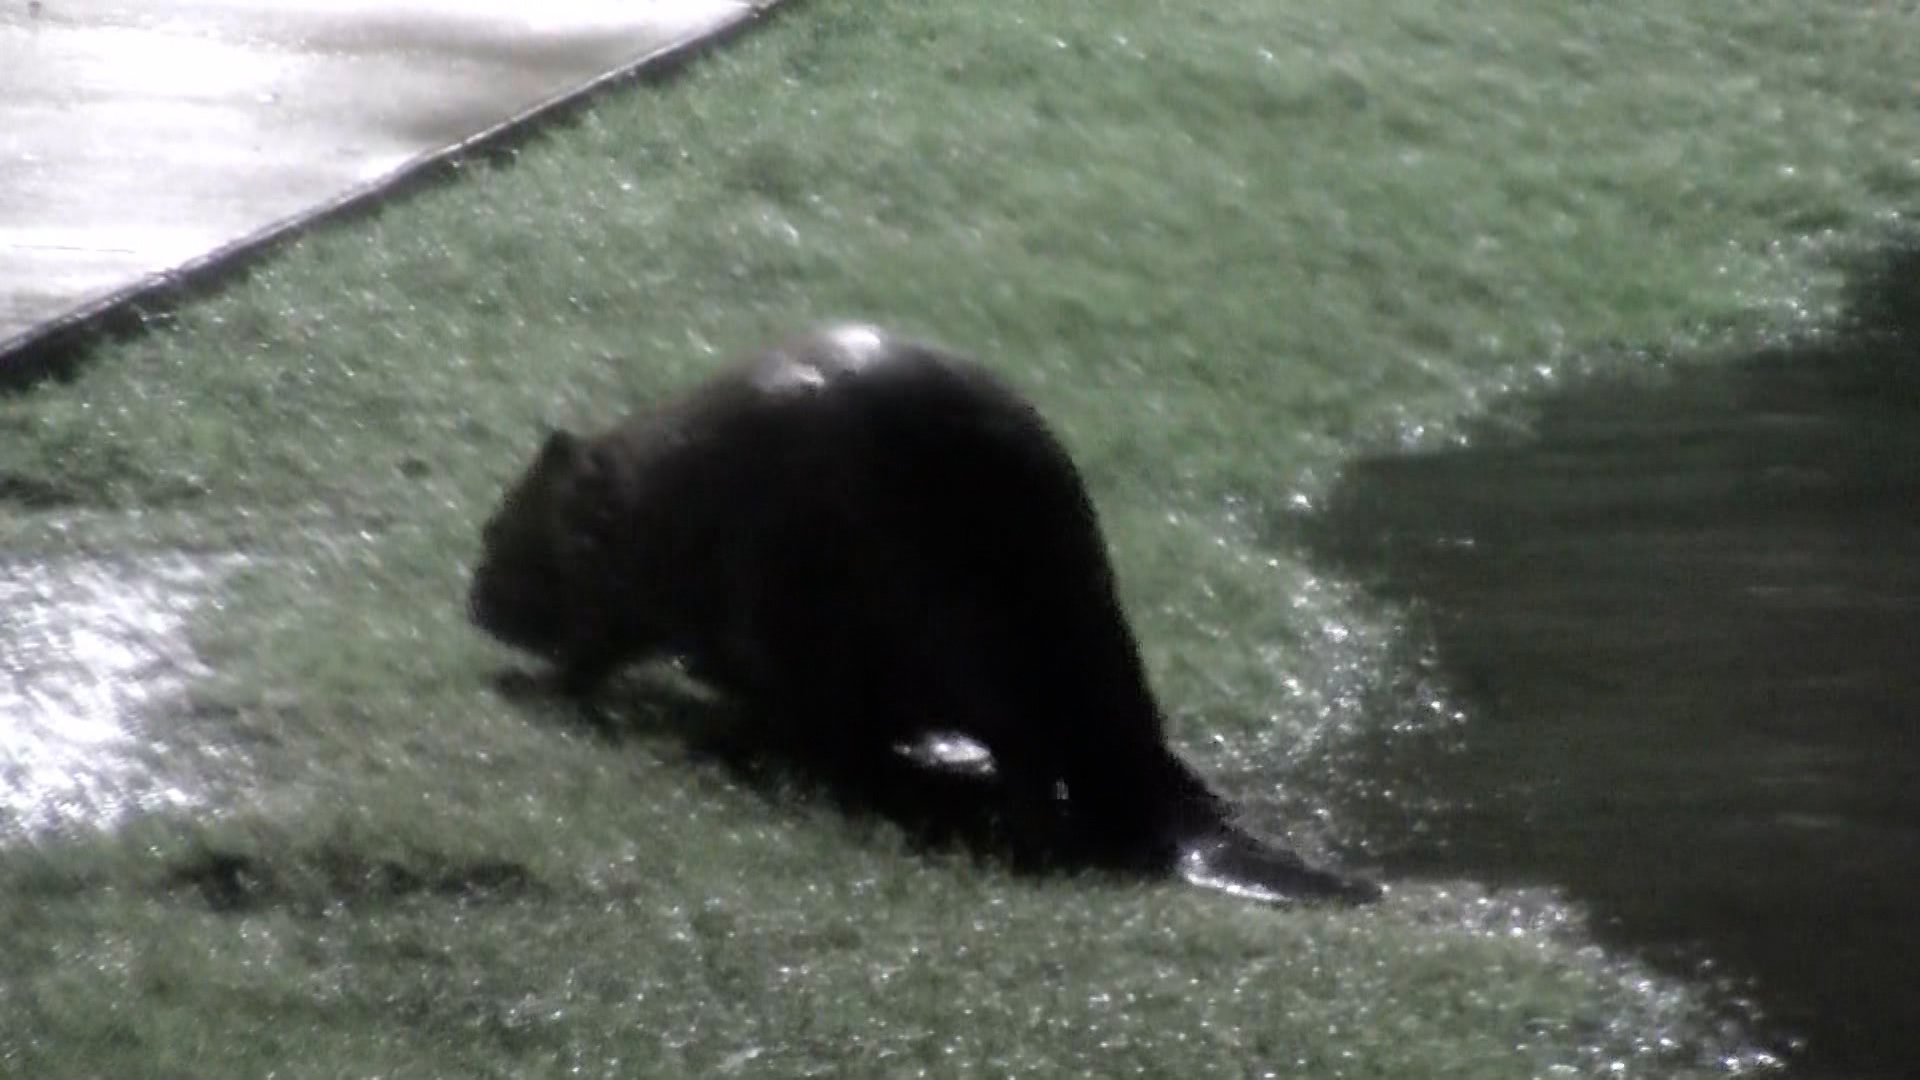 A WFAA crew was out gathering weather video when they stumbled upon the most ironic sighting: A beaver swimming in a pond at Buc-ee's.